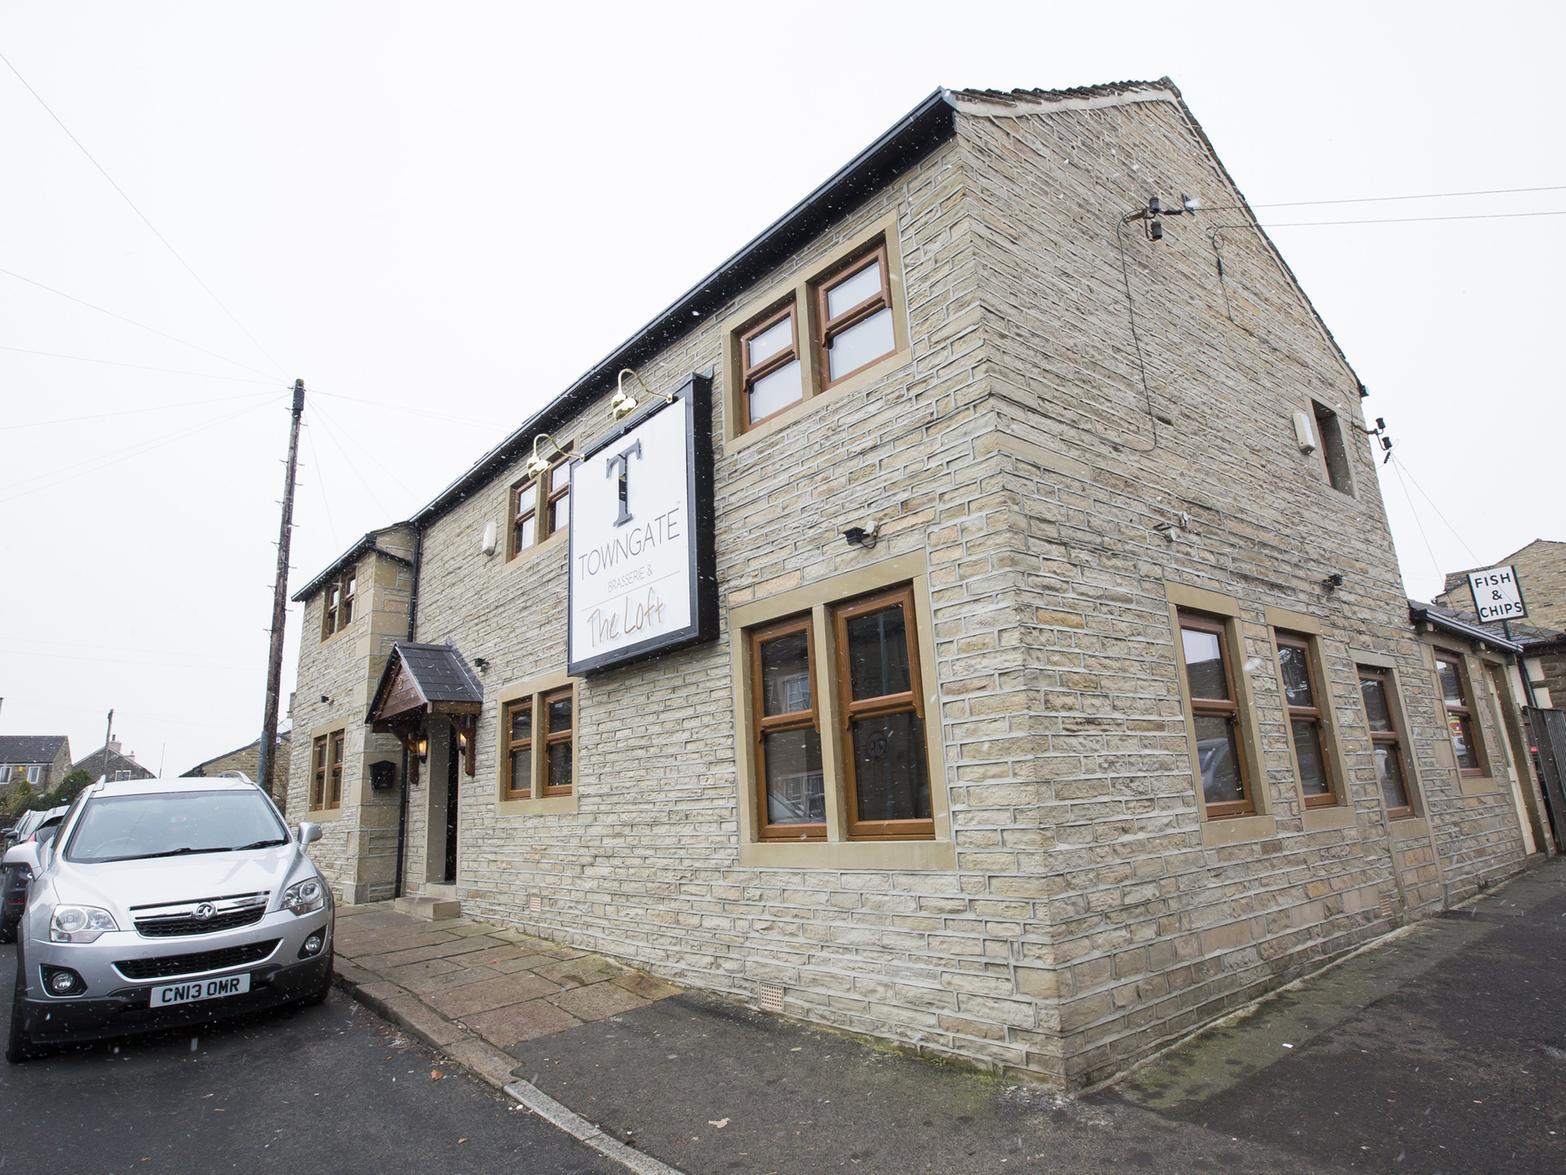 The menu at this Hipperholme restaurant is based around seasonality of ingredients and offers a menu of dishes described as modern British food.